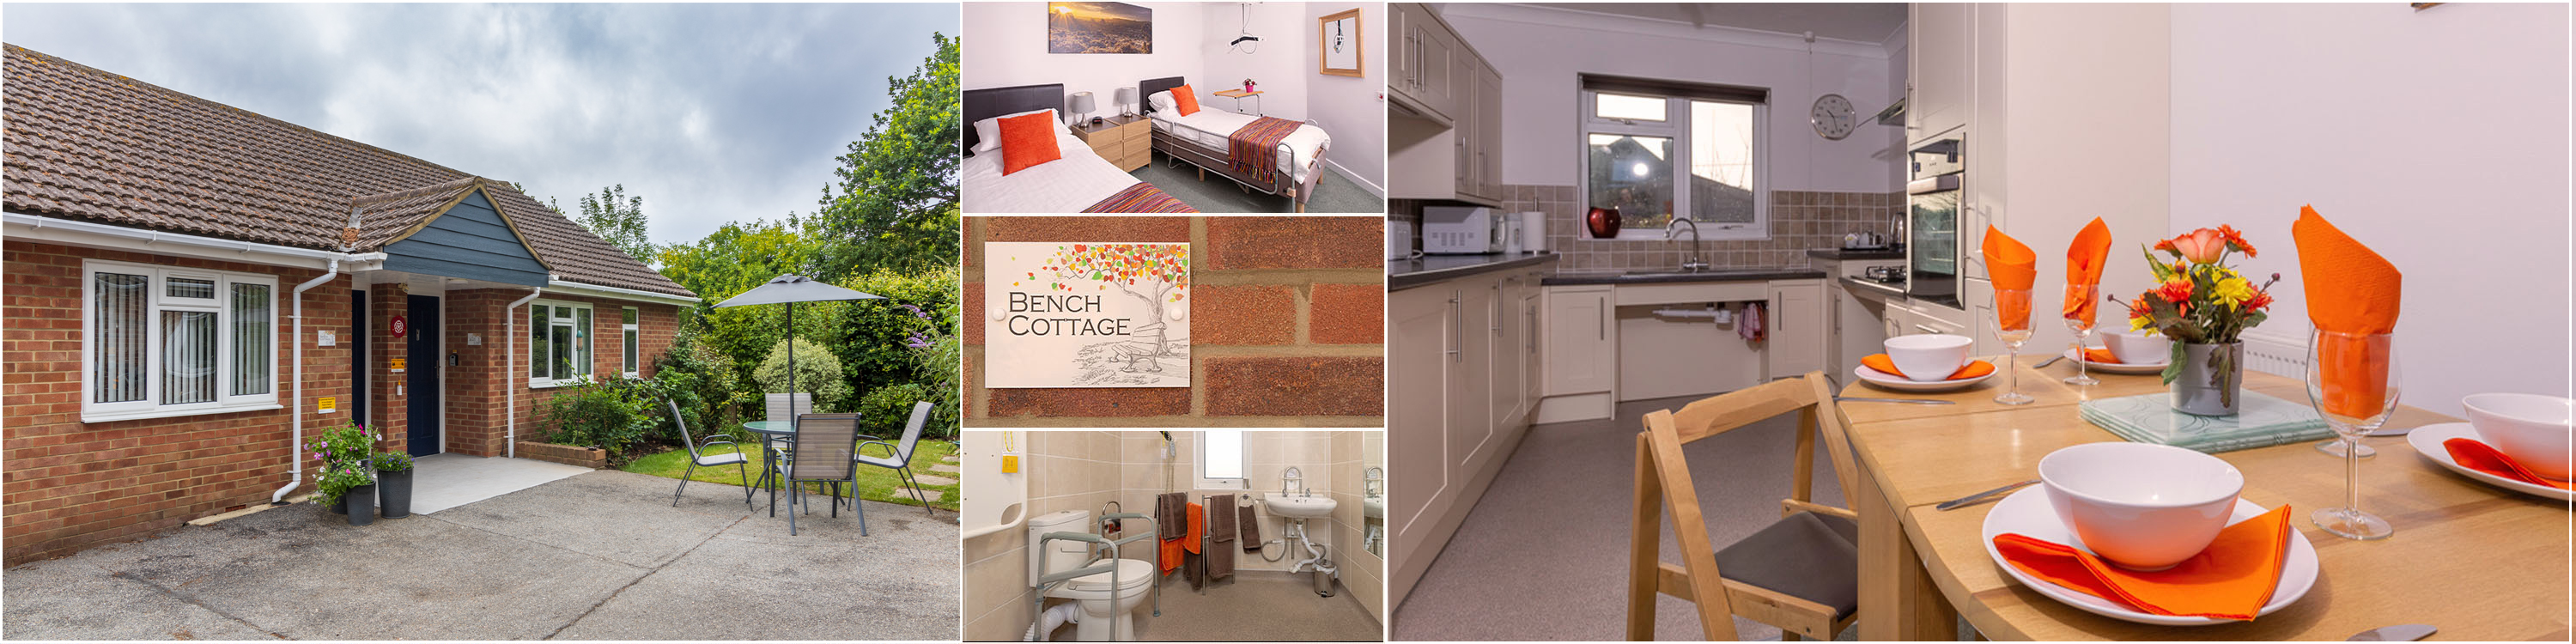 Bench Cottage - New Forest Accessible Accommodation